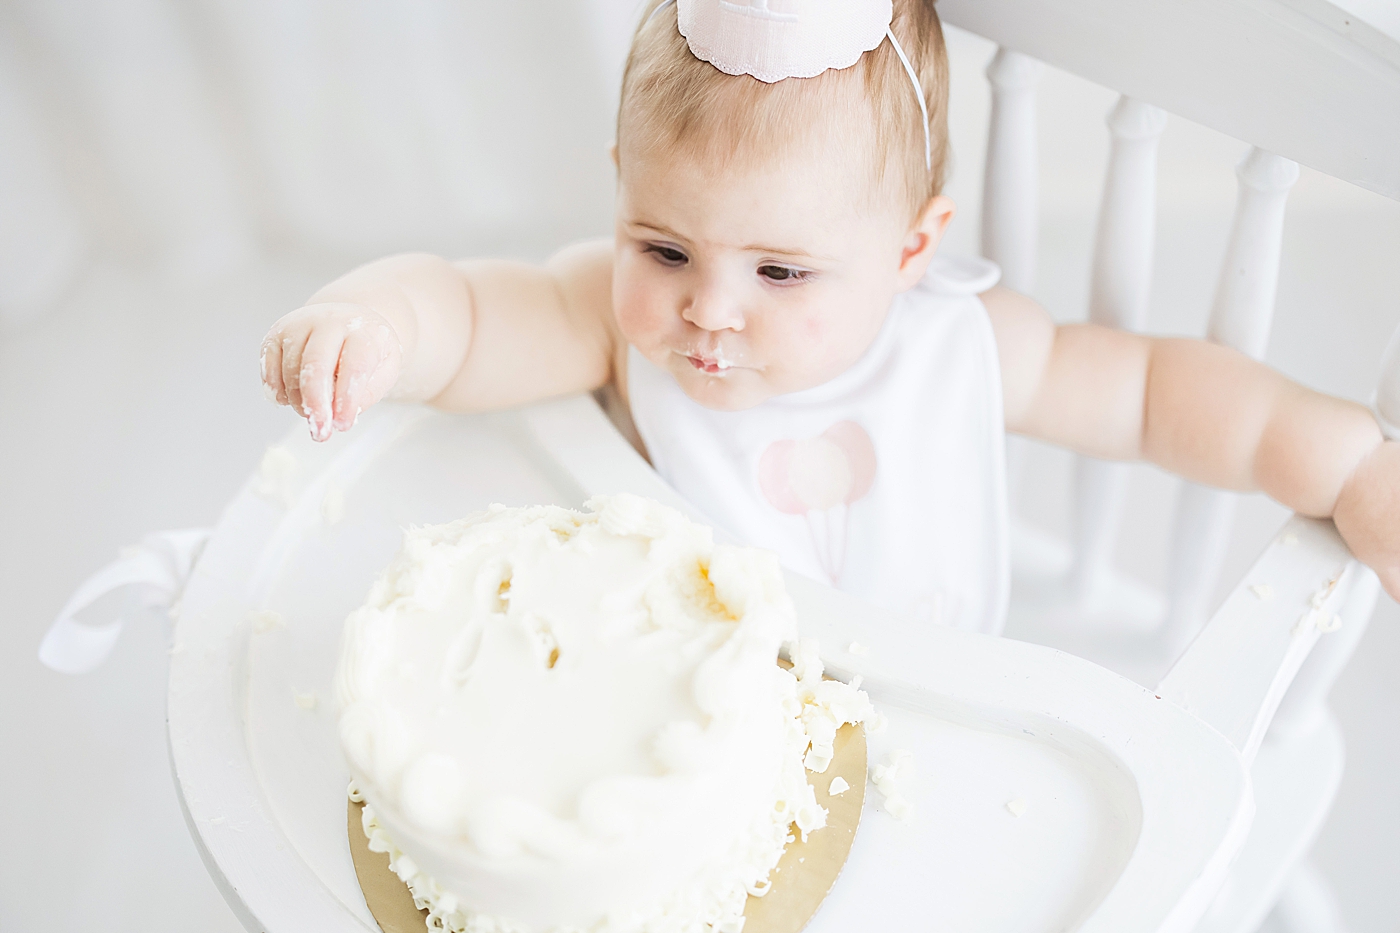 One year old photoshoot with cake smash in Houston studio. Photo by Fresh Light Photography.